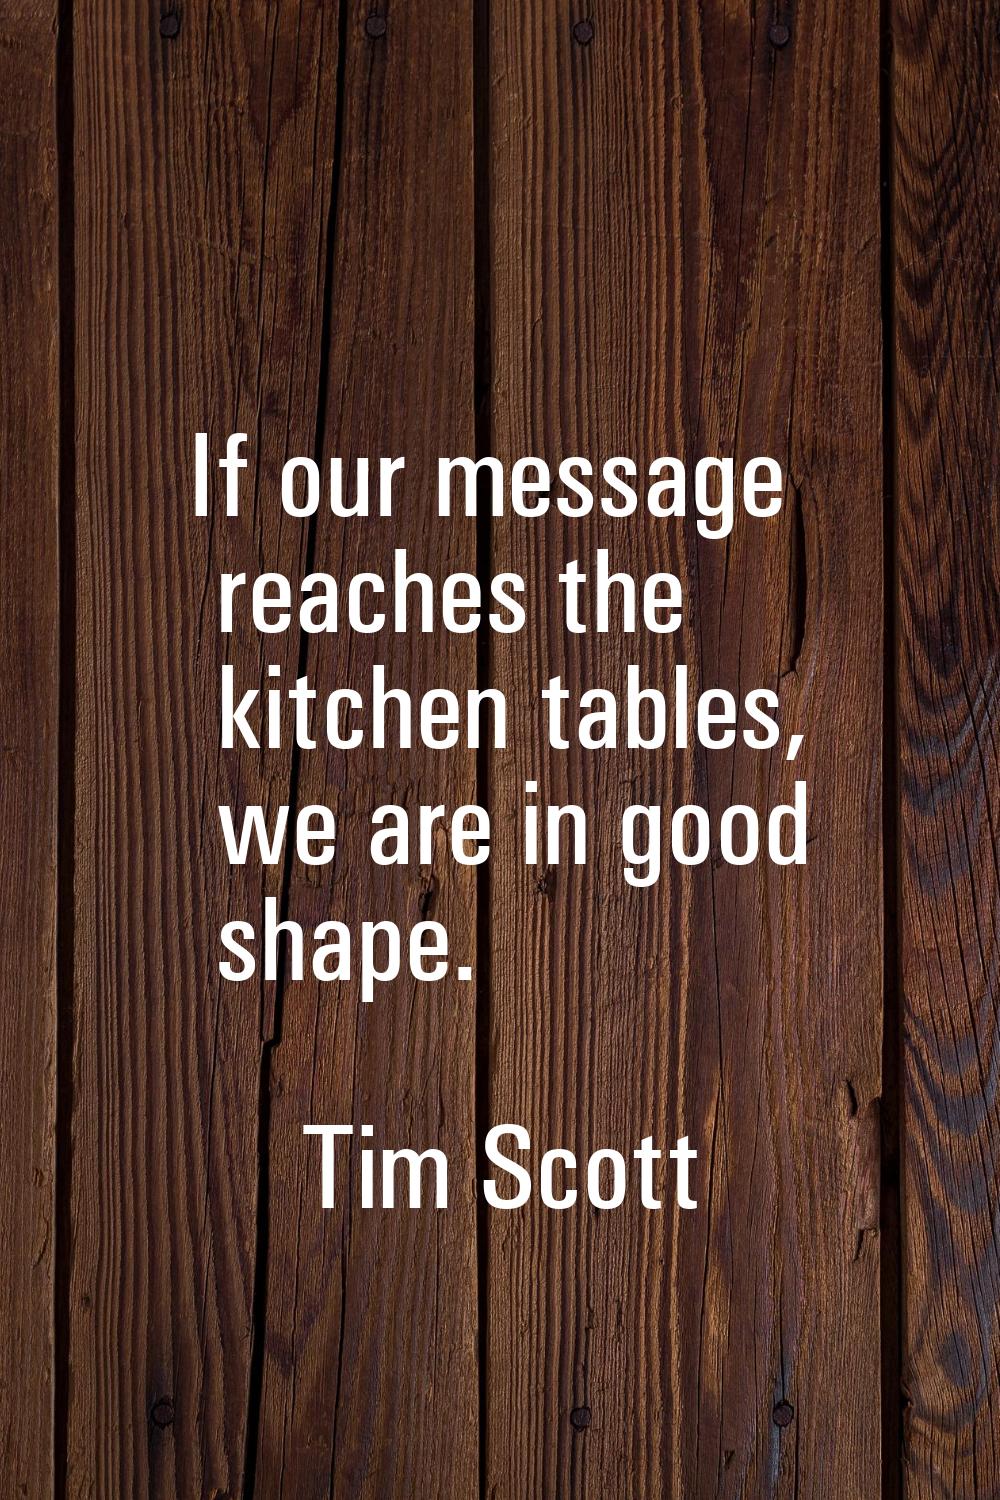 If our message reaches the kitchen tables, we are in good shape.